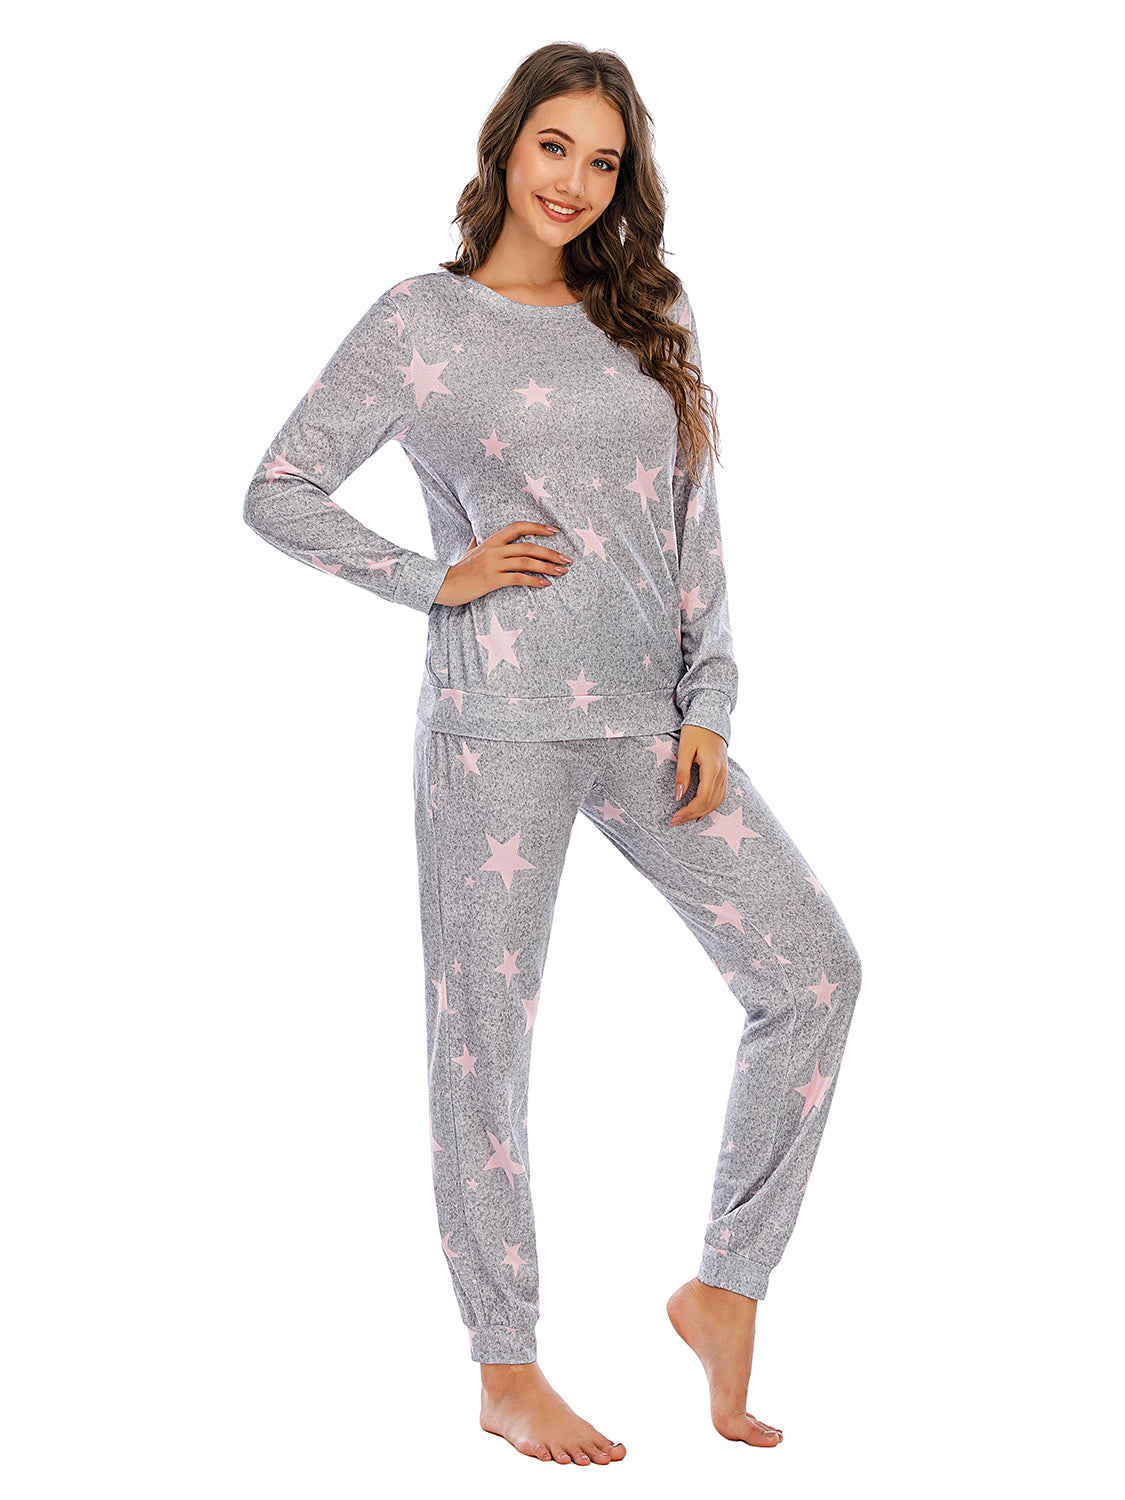 Styletrendy Star Top and Pants Lounge Set